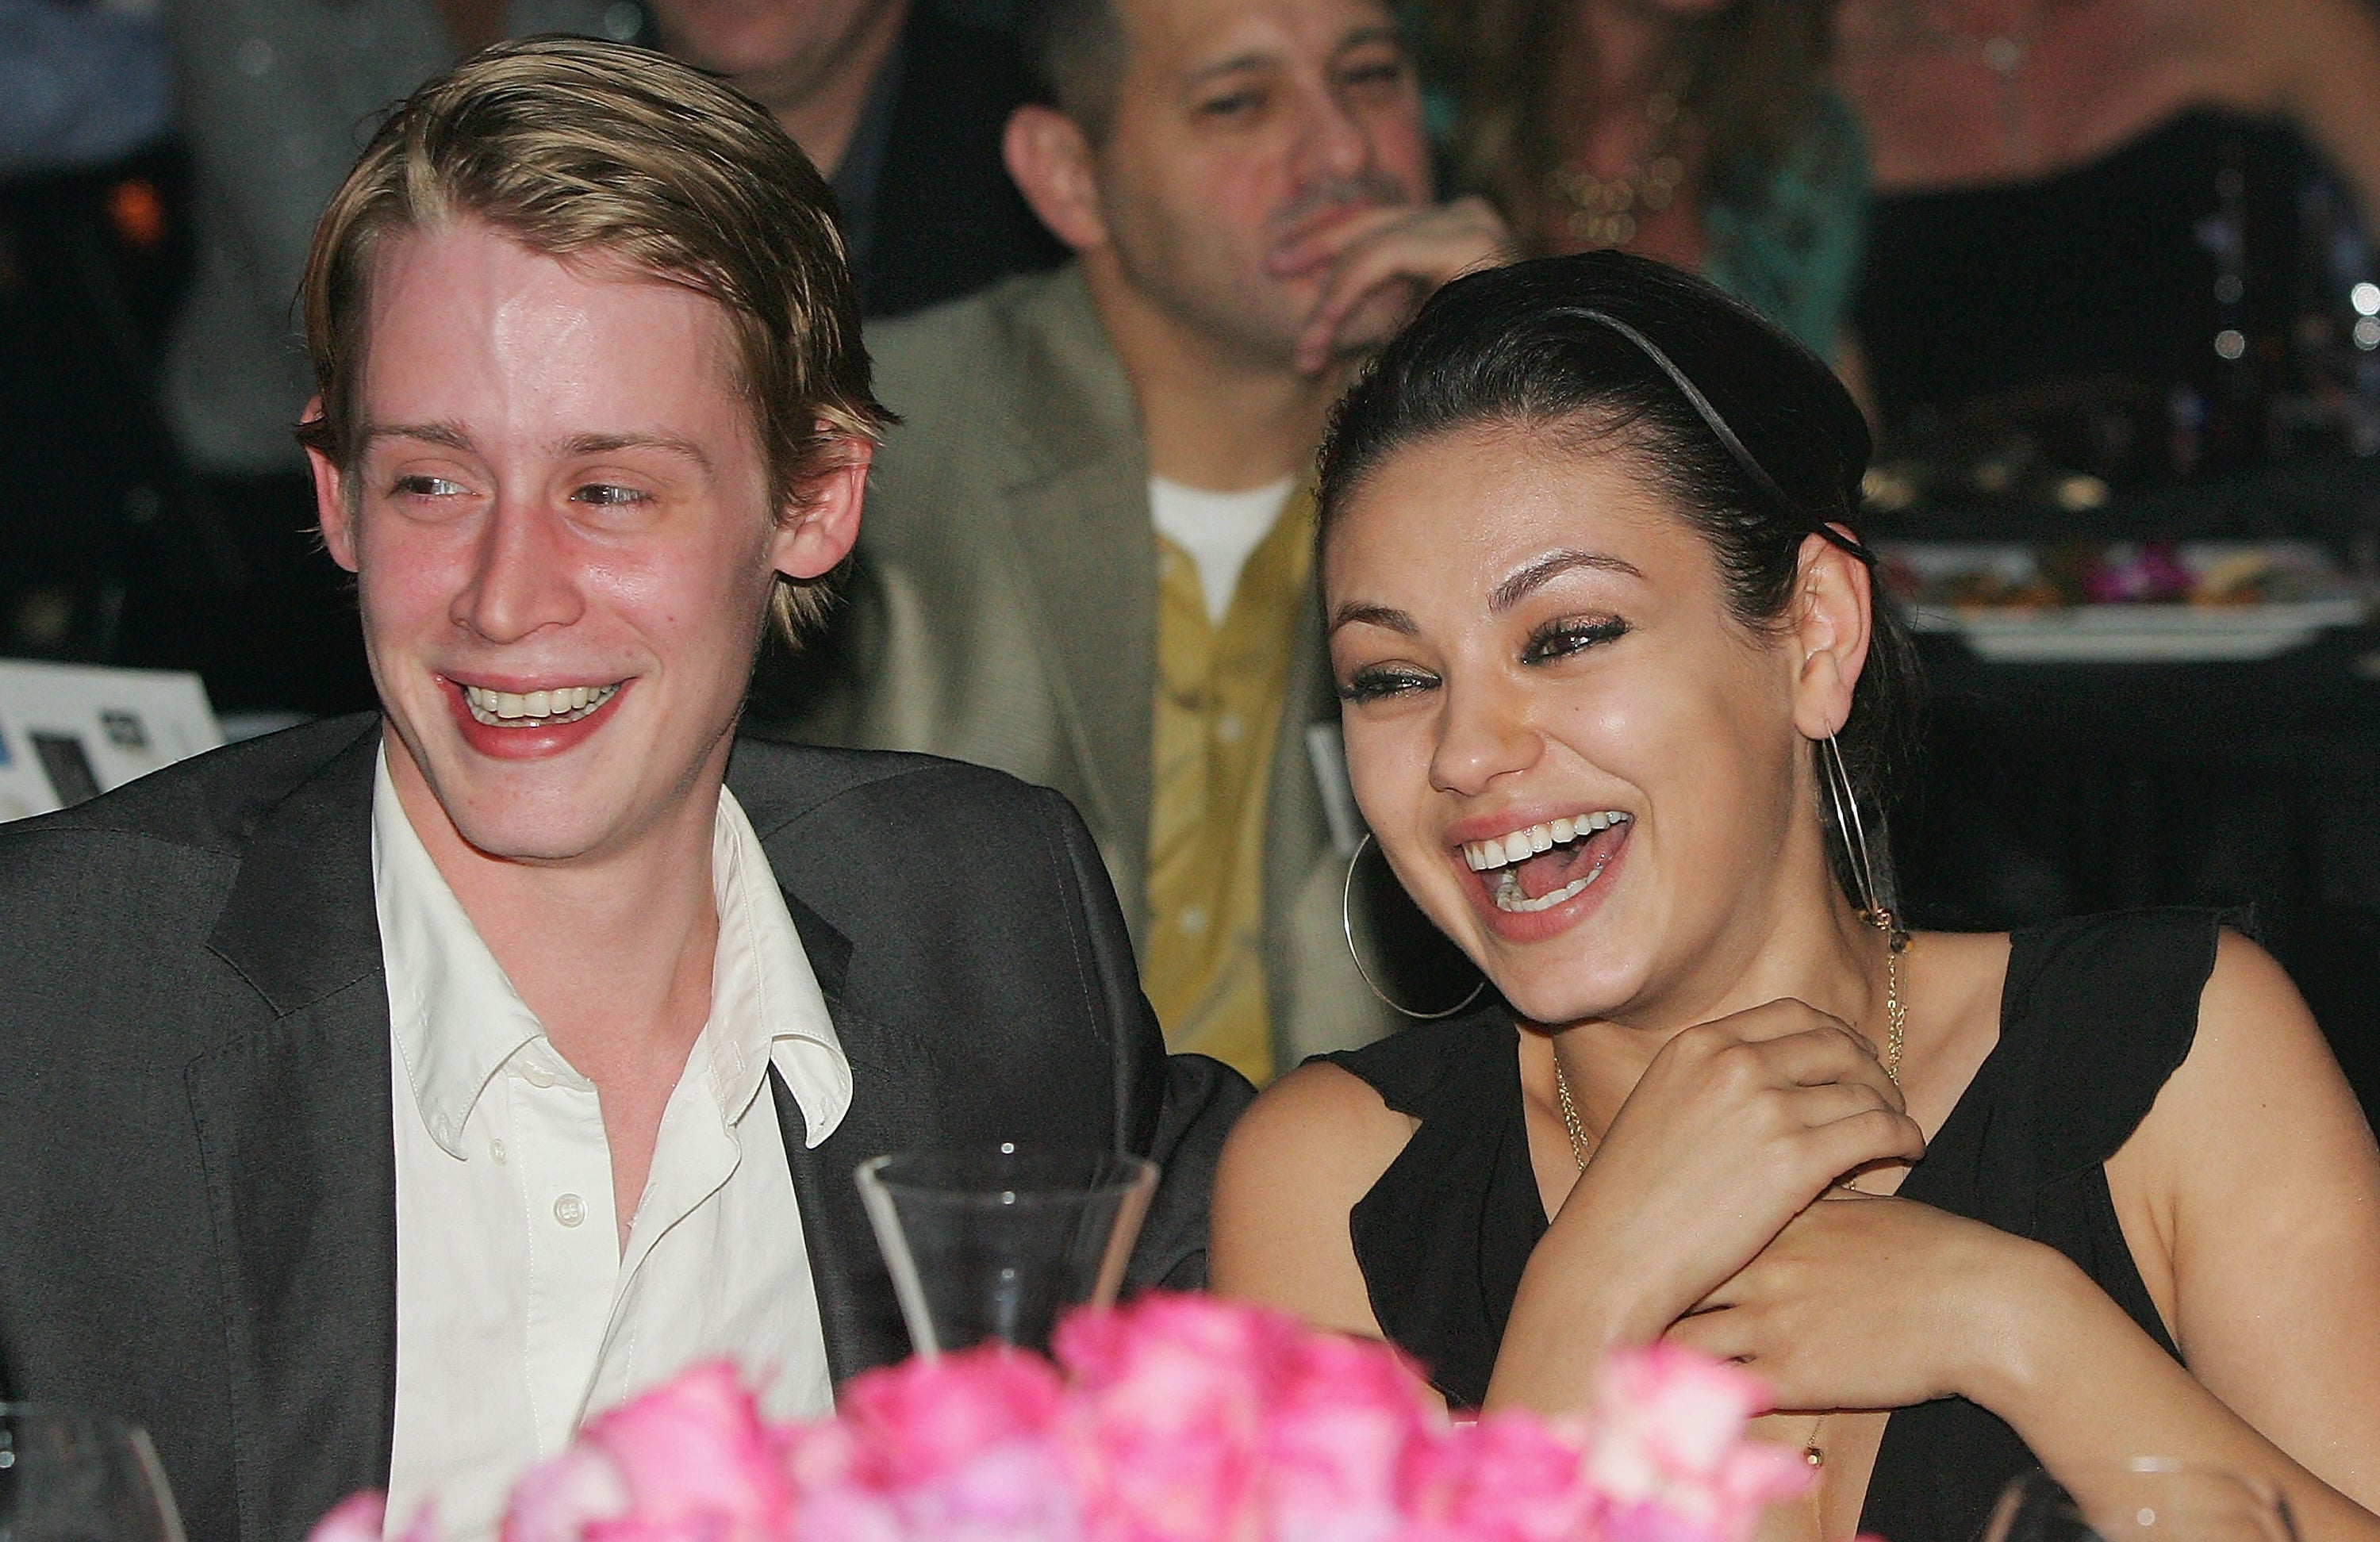 Macaulay Culkin and Mila Kunis smiling at the launch of the &quot;uBid for Hurricane Relief&quot; charity auction and benefit at the Empire Ballroom